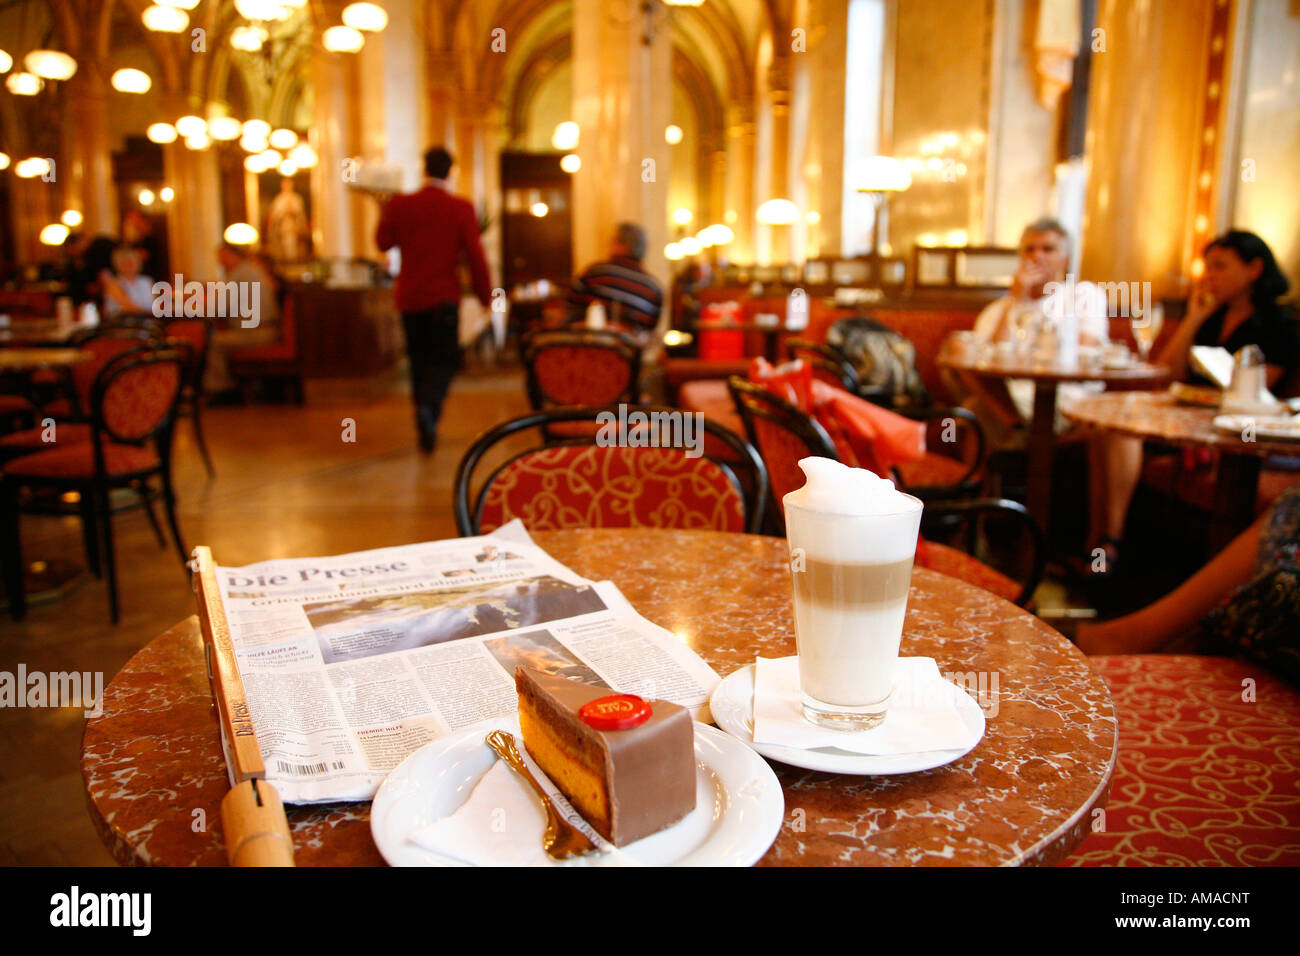 Aug 2008 - Coffee and cake at the famous Cafe Central Vienna Austria Stock Photo